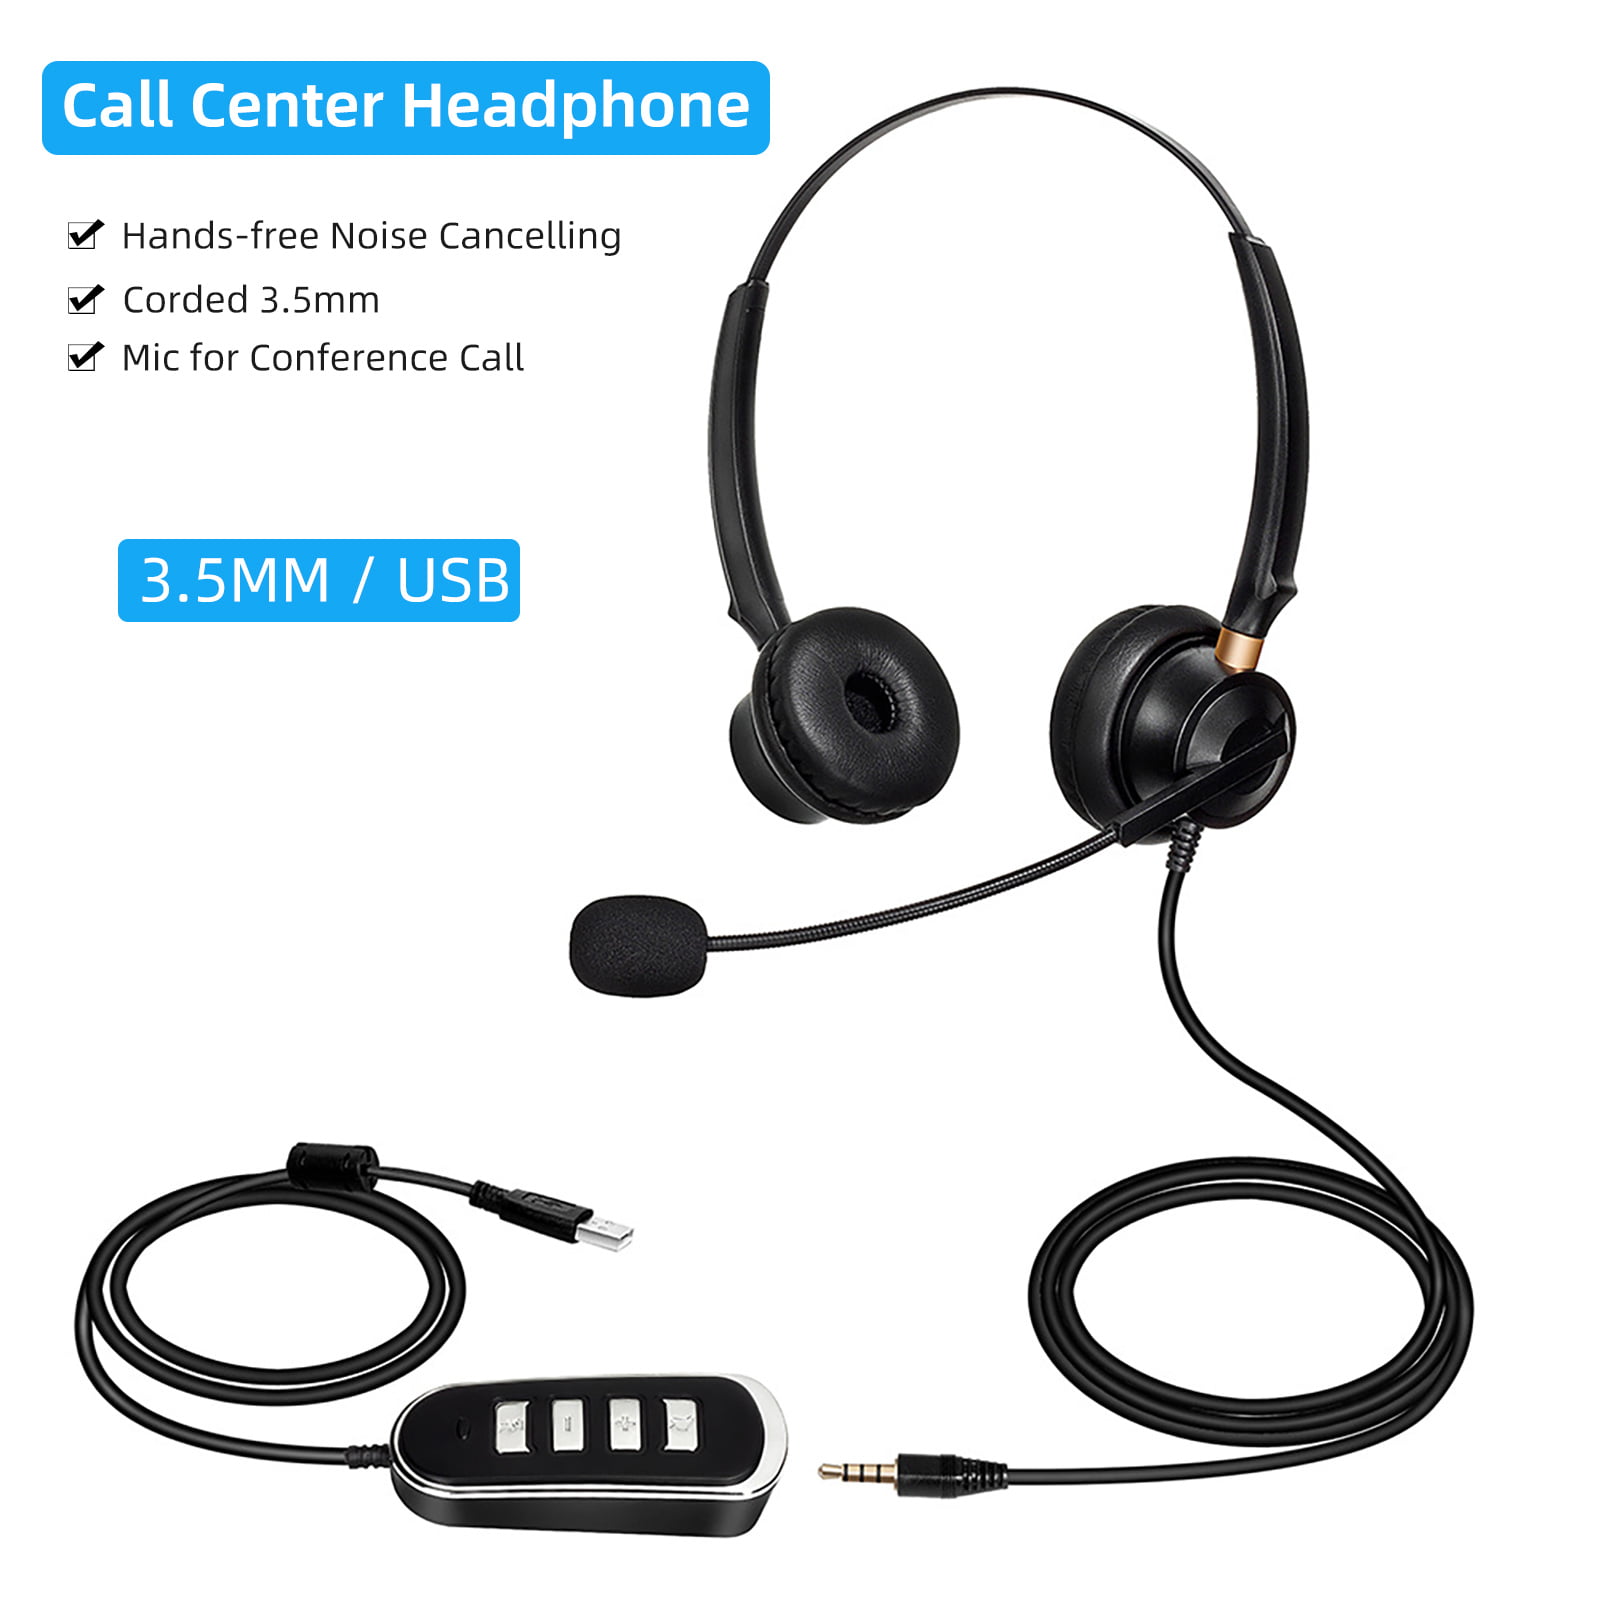 School and Officefor Office/Telework/Home/Kids Telephone Headset Call Center USB Corded Offical Headphone for PC Wired Computer Headphones for Desktop 